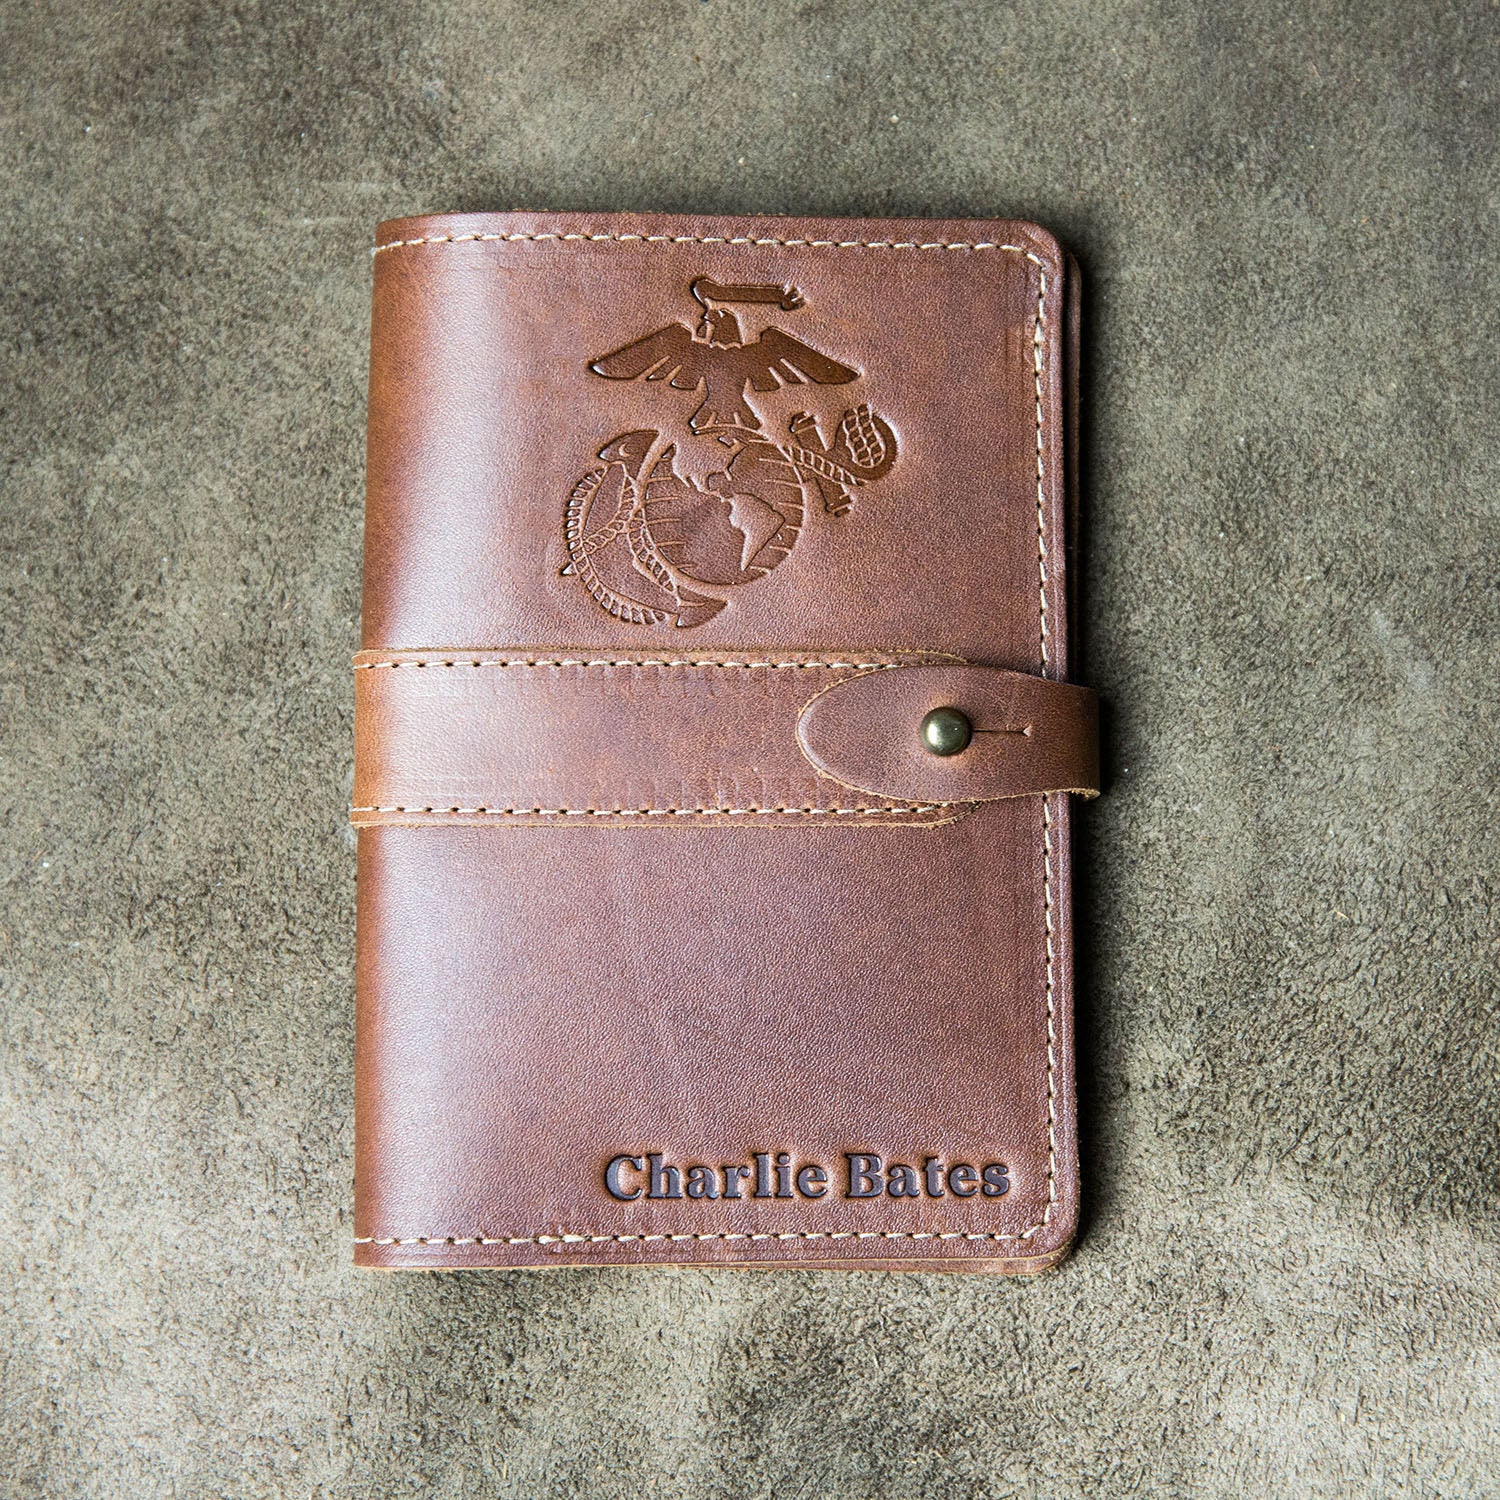 Fine leather journal cover with personalized name and Marine Corps logo